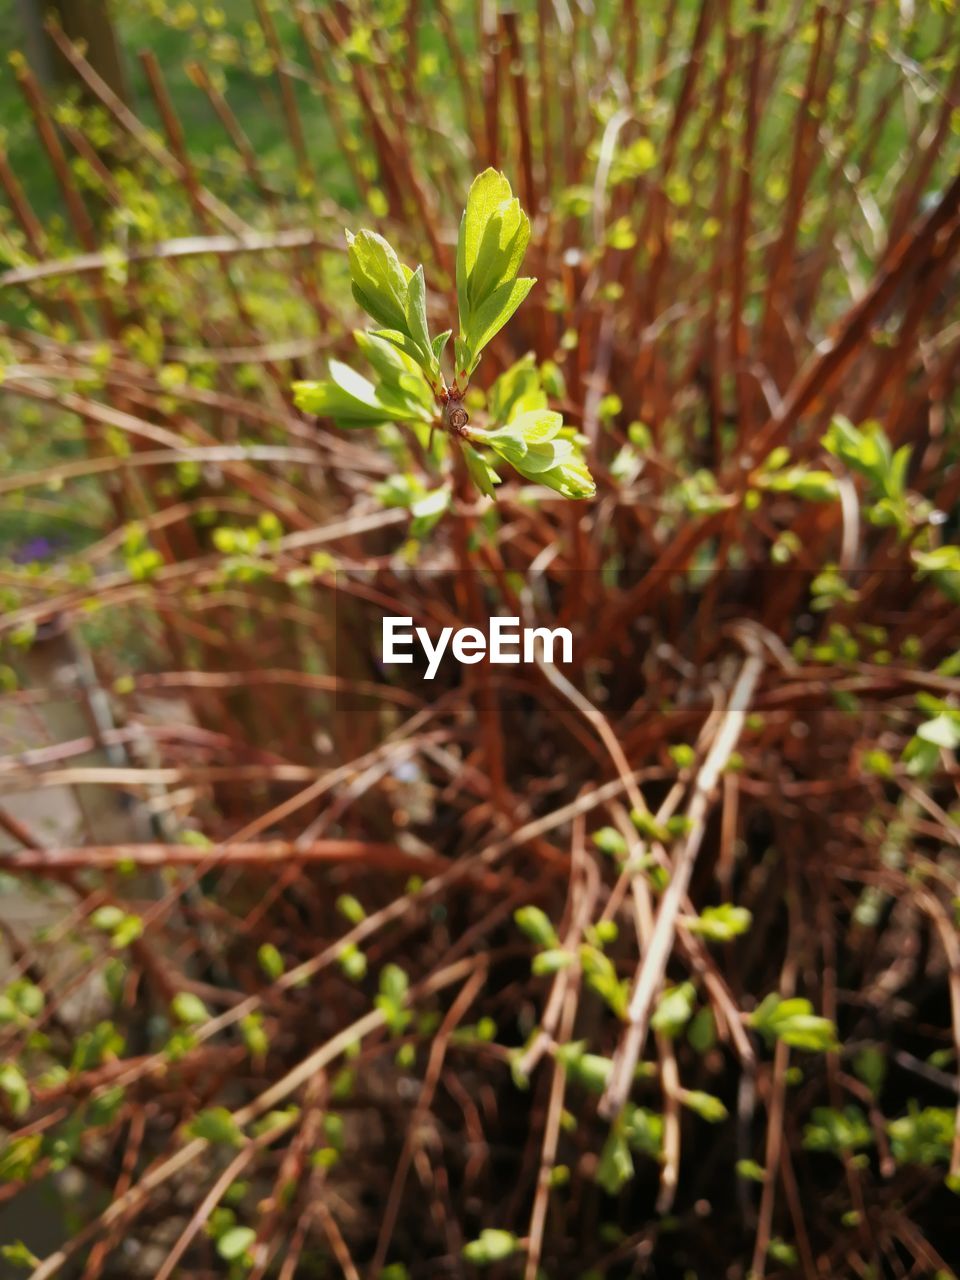 CLOSE-UP OF PLANT GROWING IN FIELD